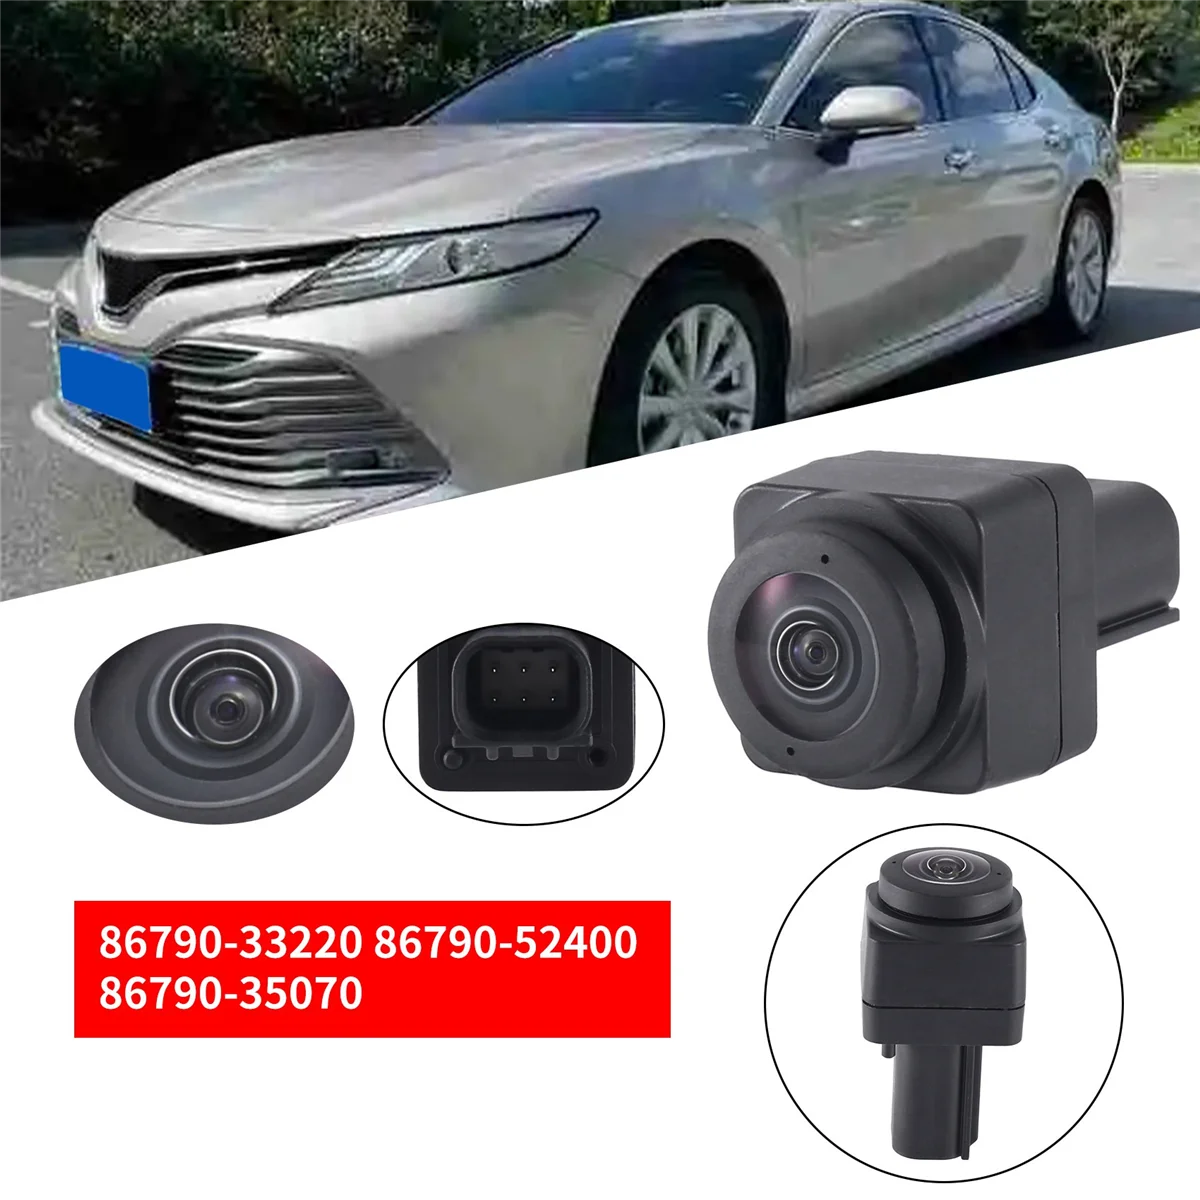 

Car Front Surround View Camera 86790-33220 86790-52400 86790-35070 for Toyota Camry Aqua 4Runner Grille Assist Camera